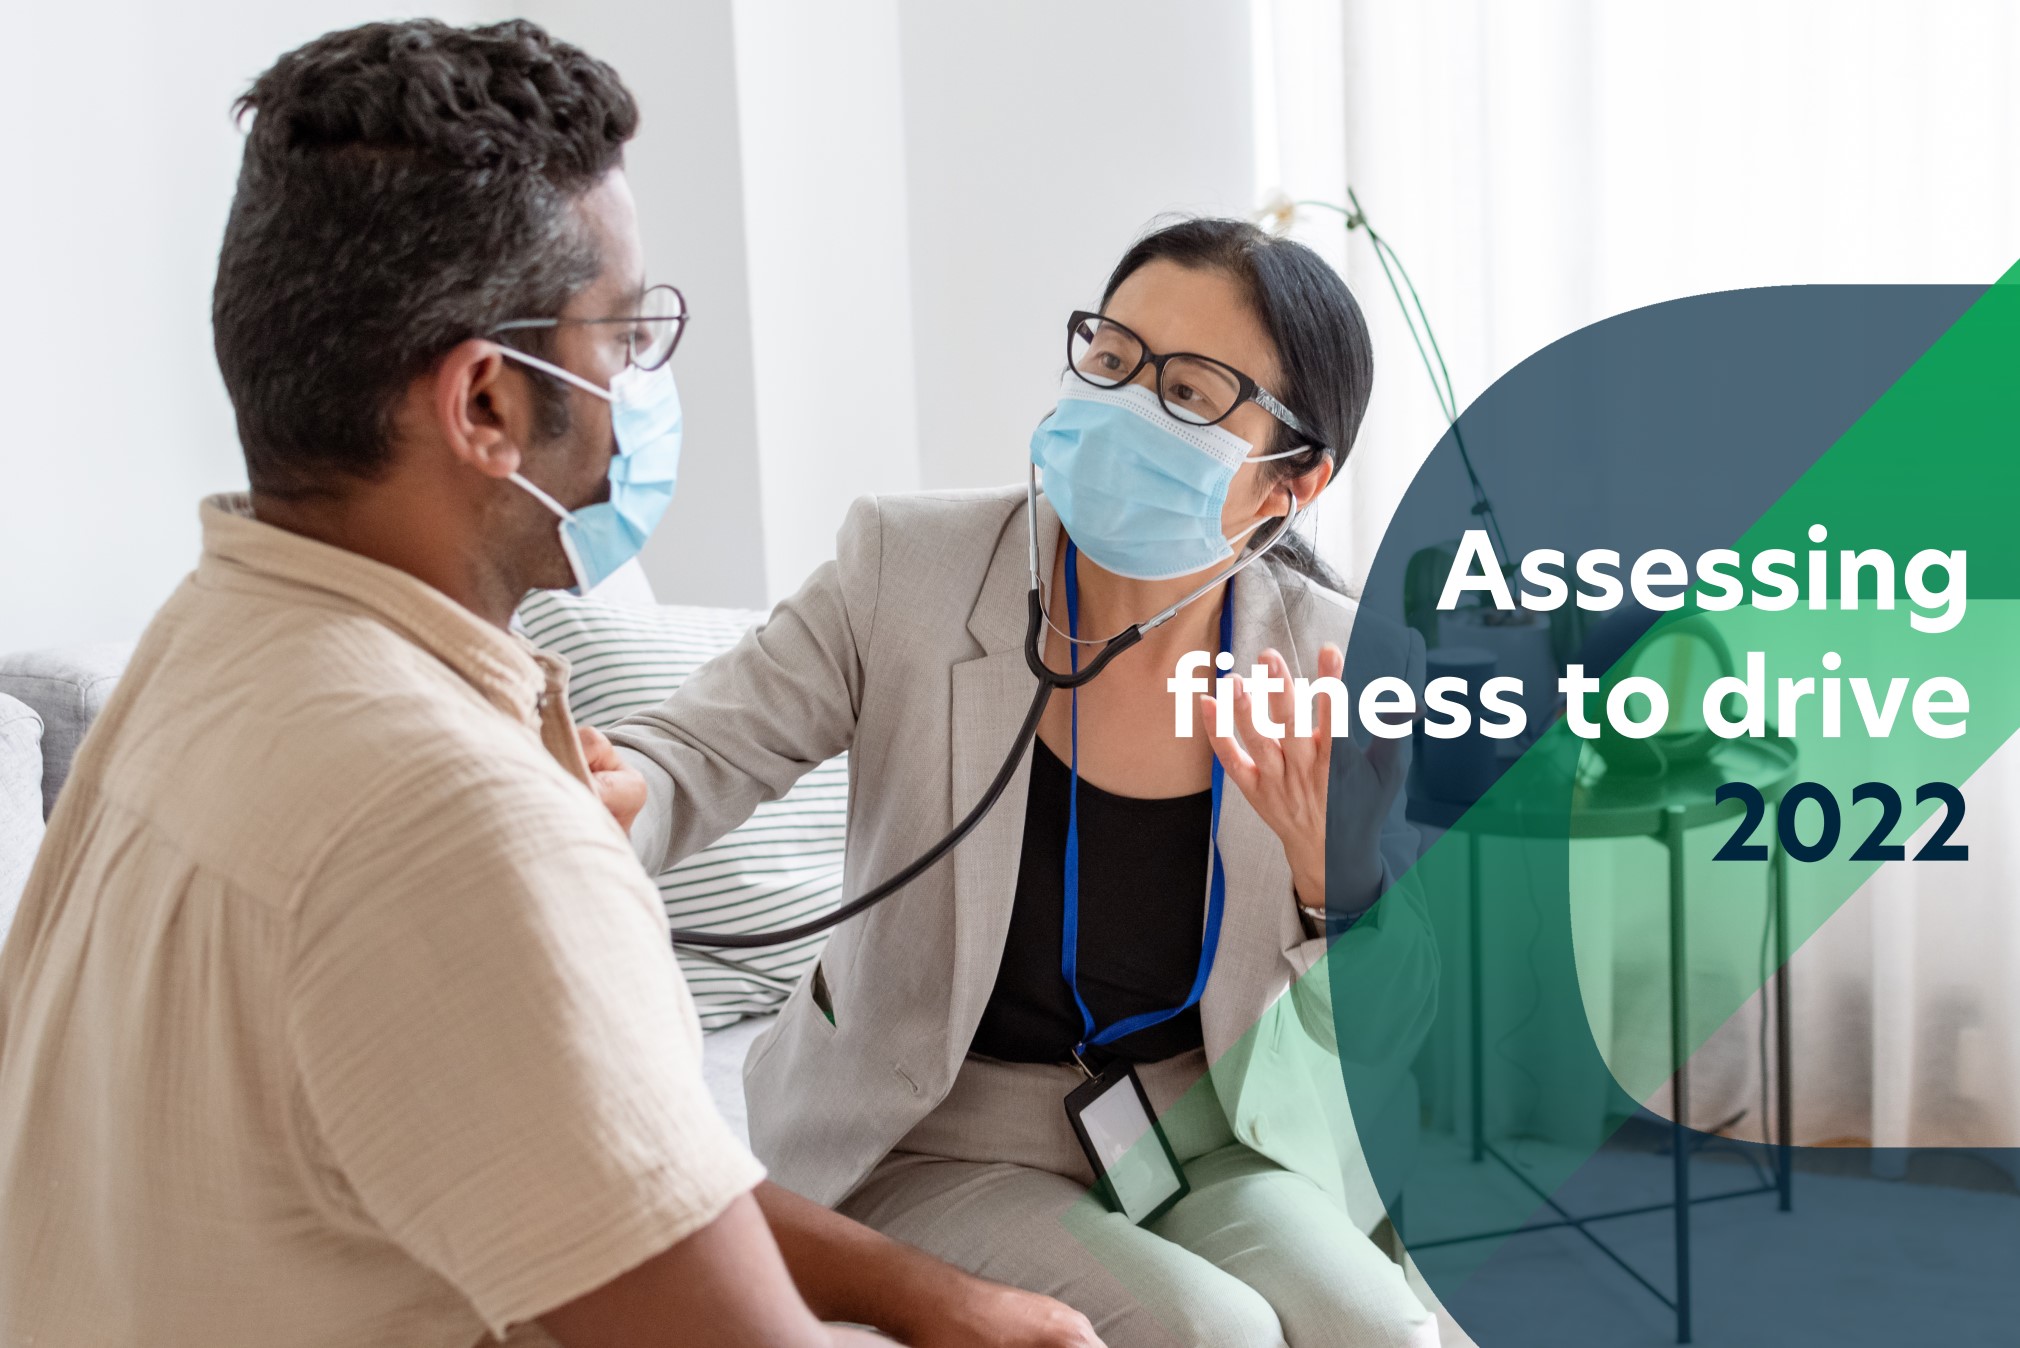 Text saying "Assessing fitness to drive 2022". Background picture of a doctor listening to patient's heart.